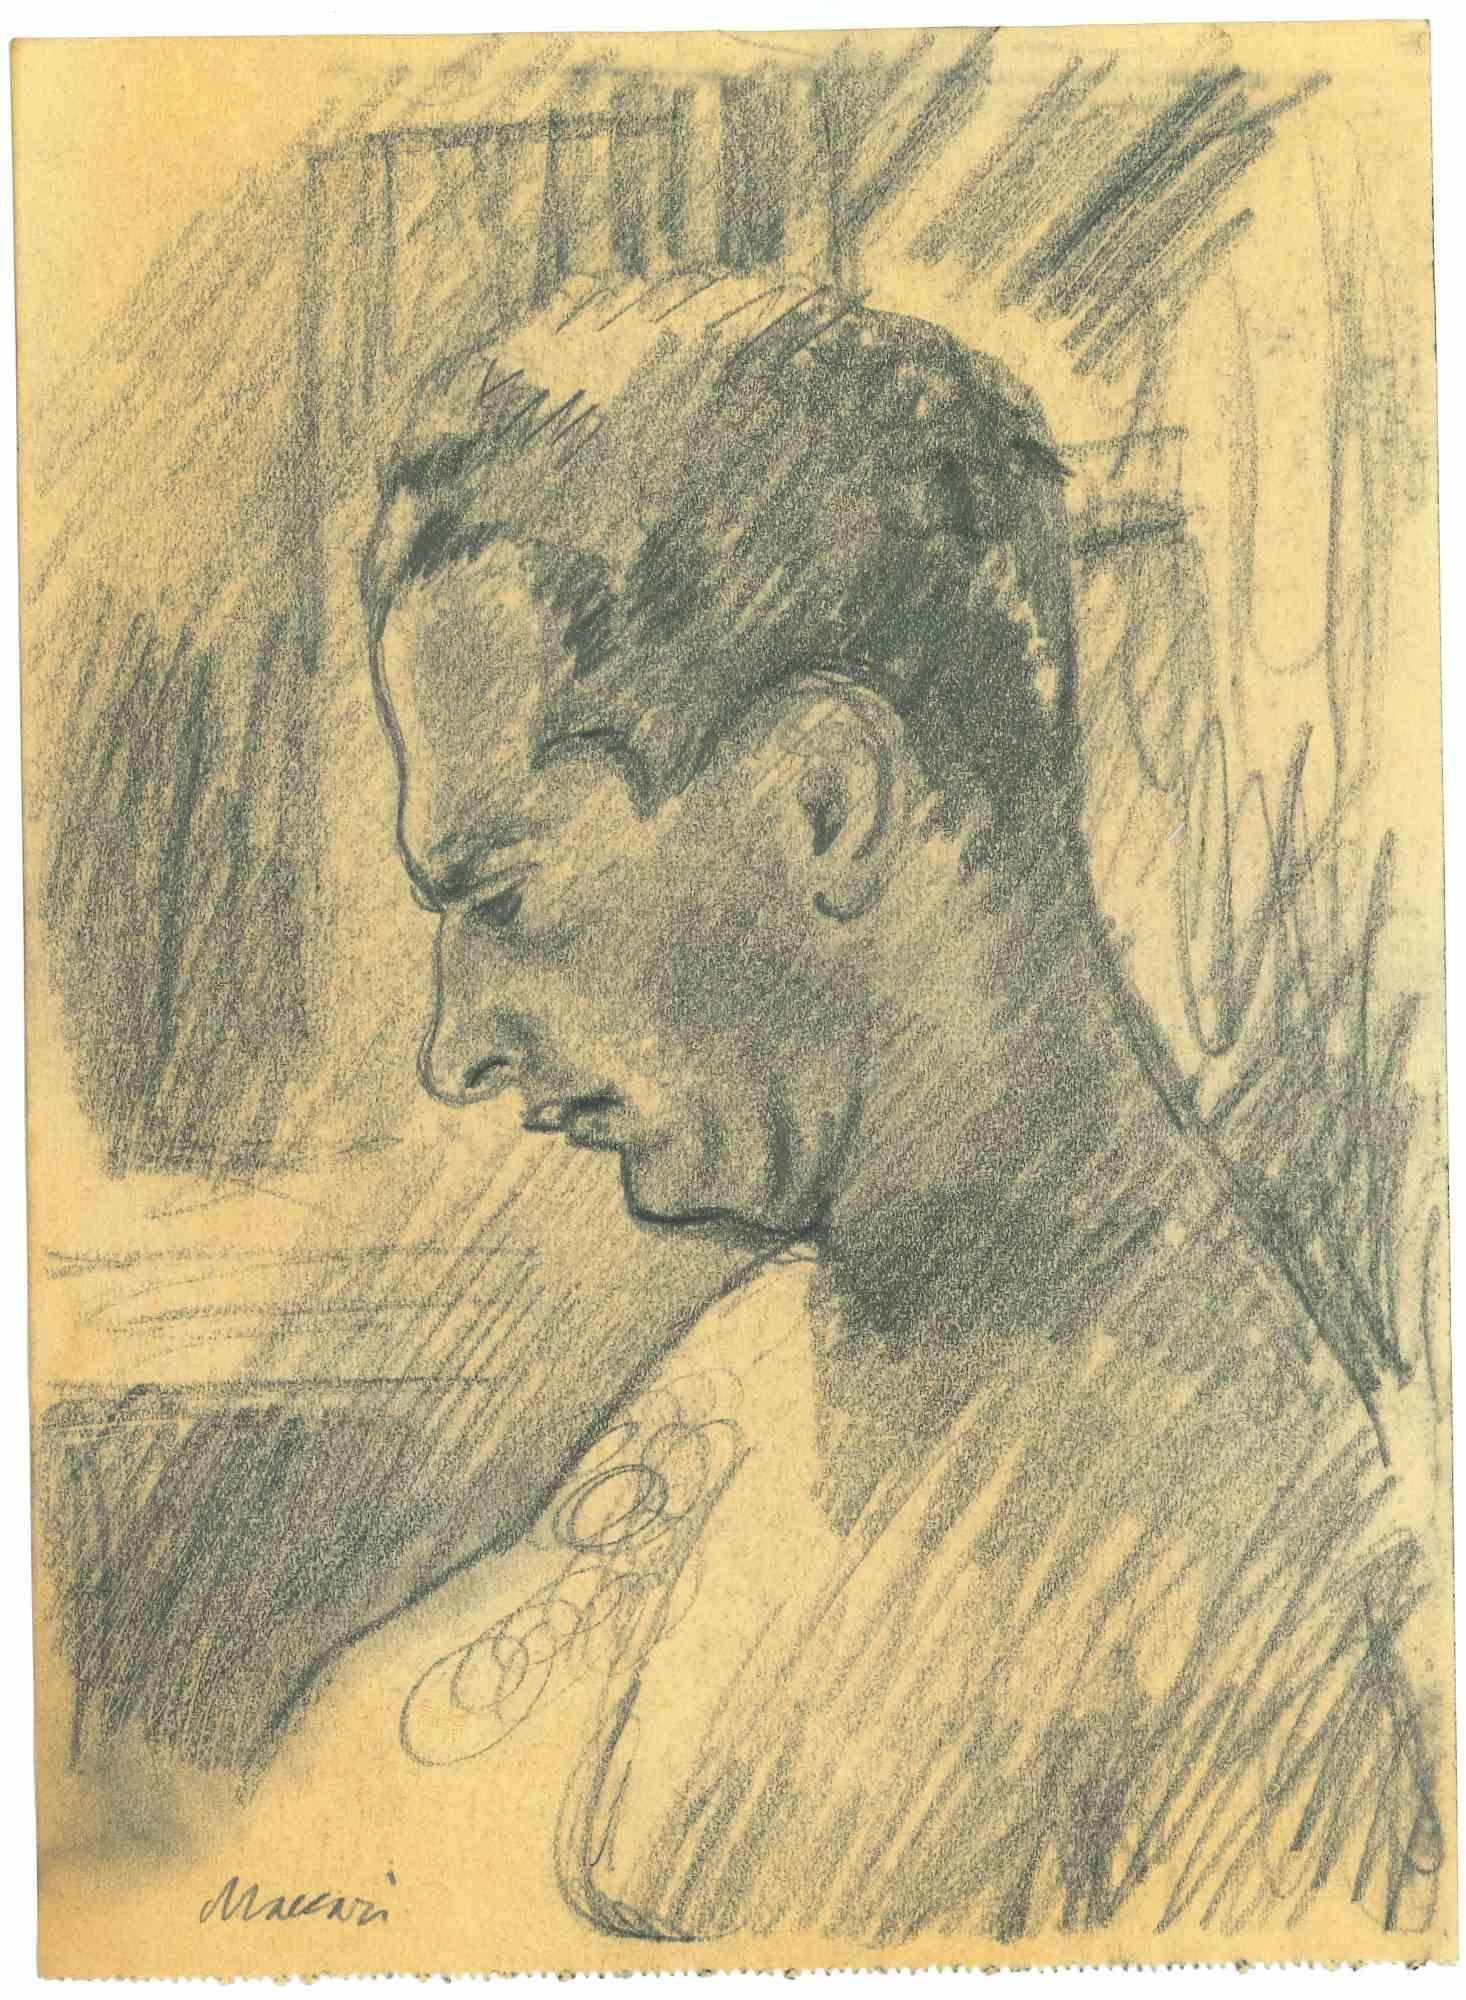 The Profile is an Original Drawing in pencil on creamy-colored paper realized by Mino Maccari in the mid-20th century.

Hand-signed by the artist on the lower.

Good conditions.

Mino Maccari (1898-1989) was an Italian writer, painter, engraver, and